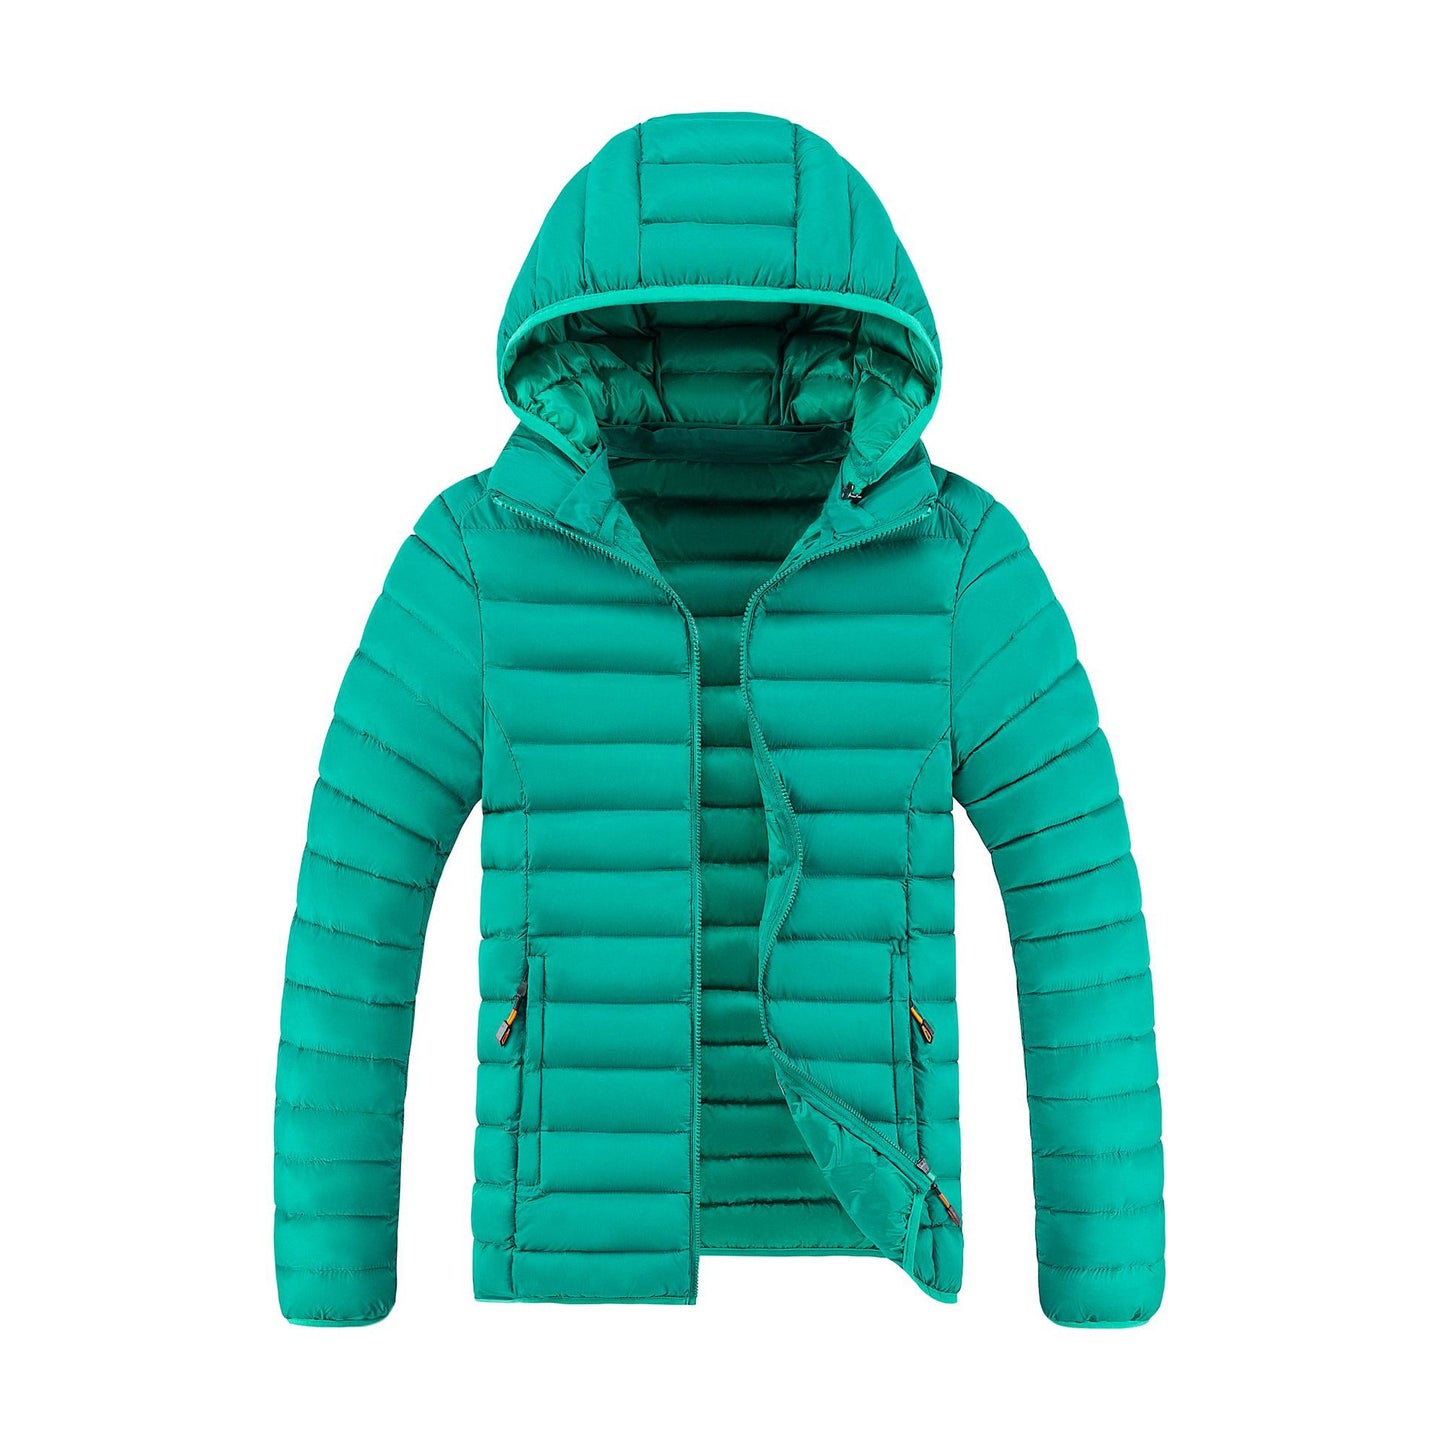 Slim-fit Lightweight Cotton-padded Plus Size Multi-color Down Jacket